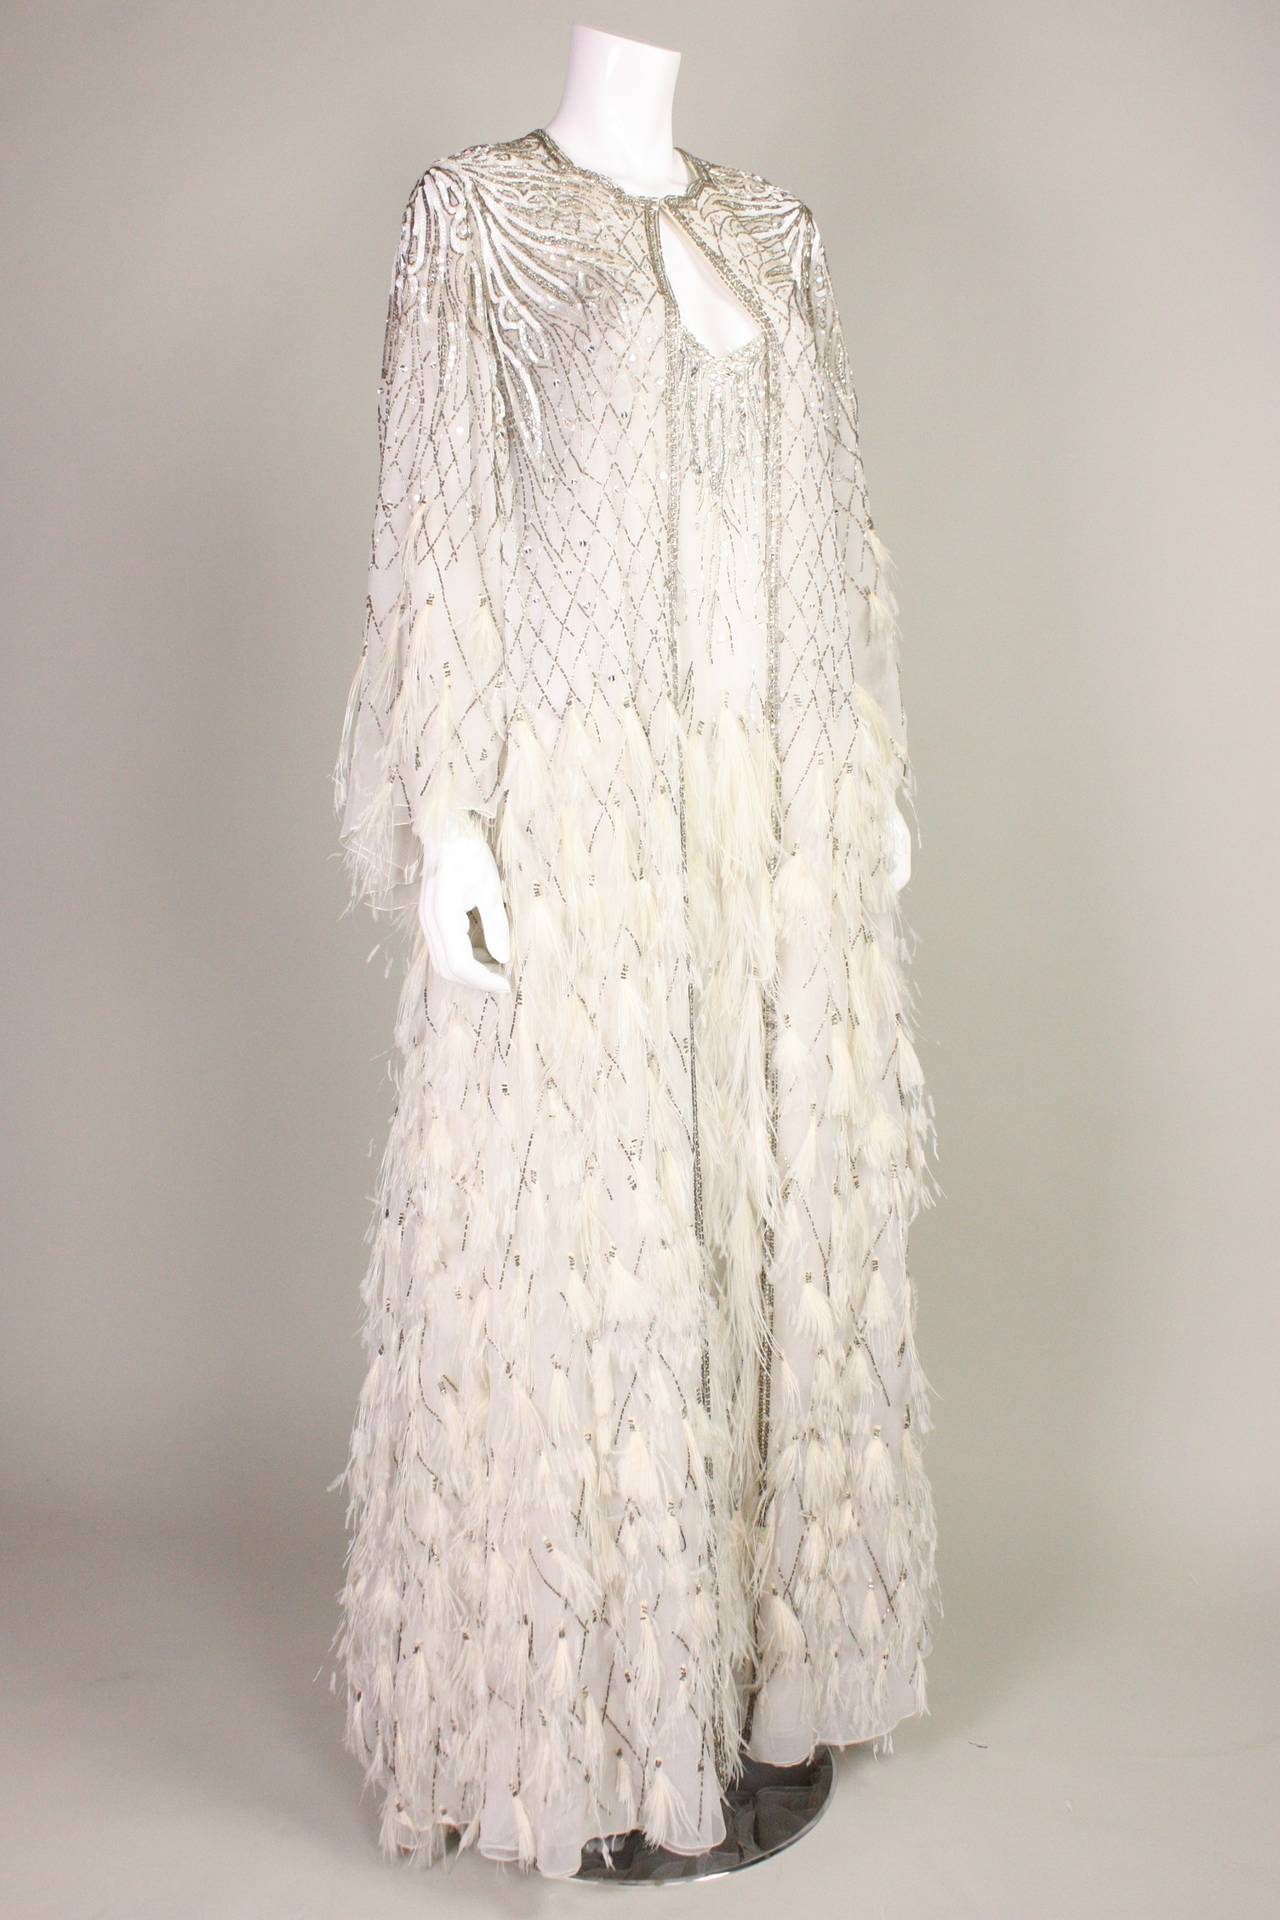 Fabulous gown and coat from Ruben Panis are made of white chiffon that is adorned with white feathers, rhinestones, sequins, and beading.  Long sleeved coat is floor-length and fastens at the center front neck with a hook and eye closure.  Sexy gown